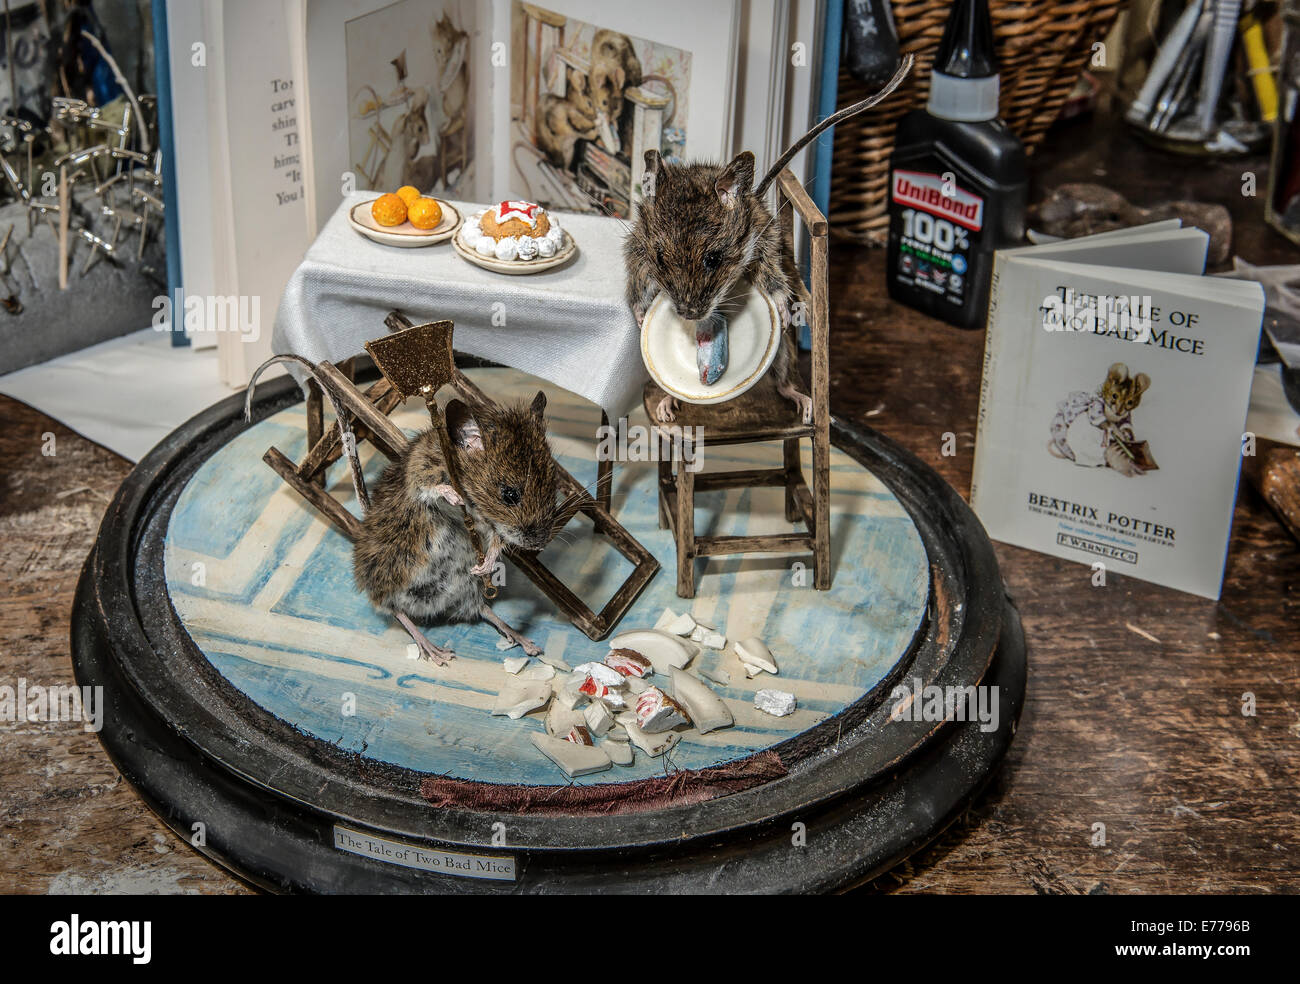 Taxidermy mice in tea party scene recreating Beatrix Potter story 'The Tale of Two Bad Mice' Stock Photo